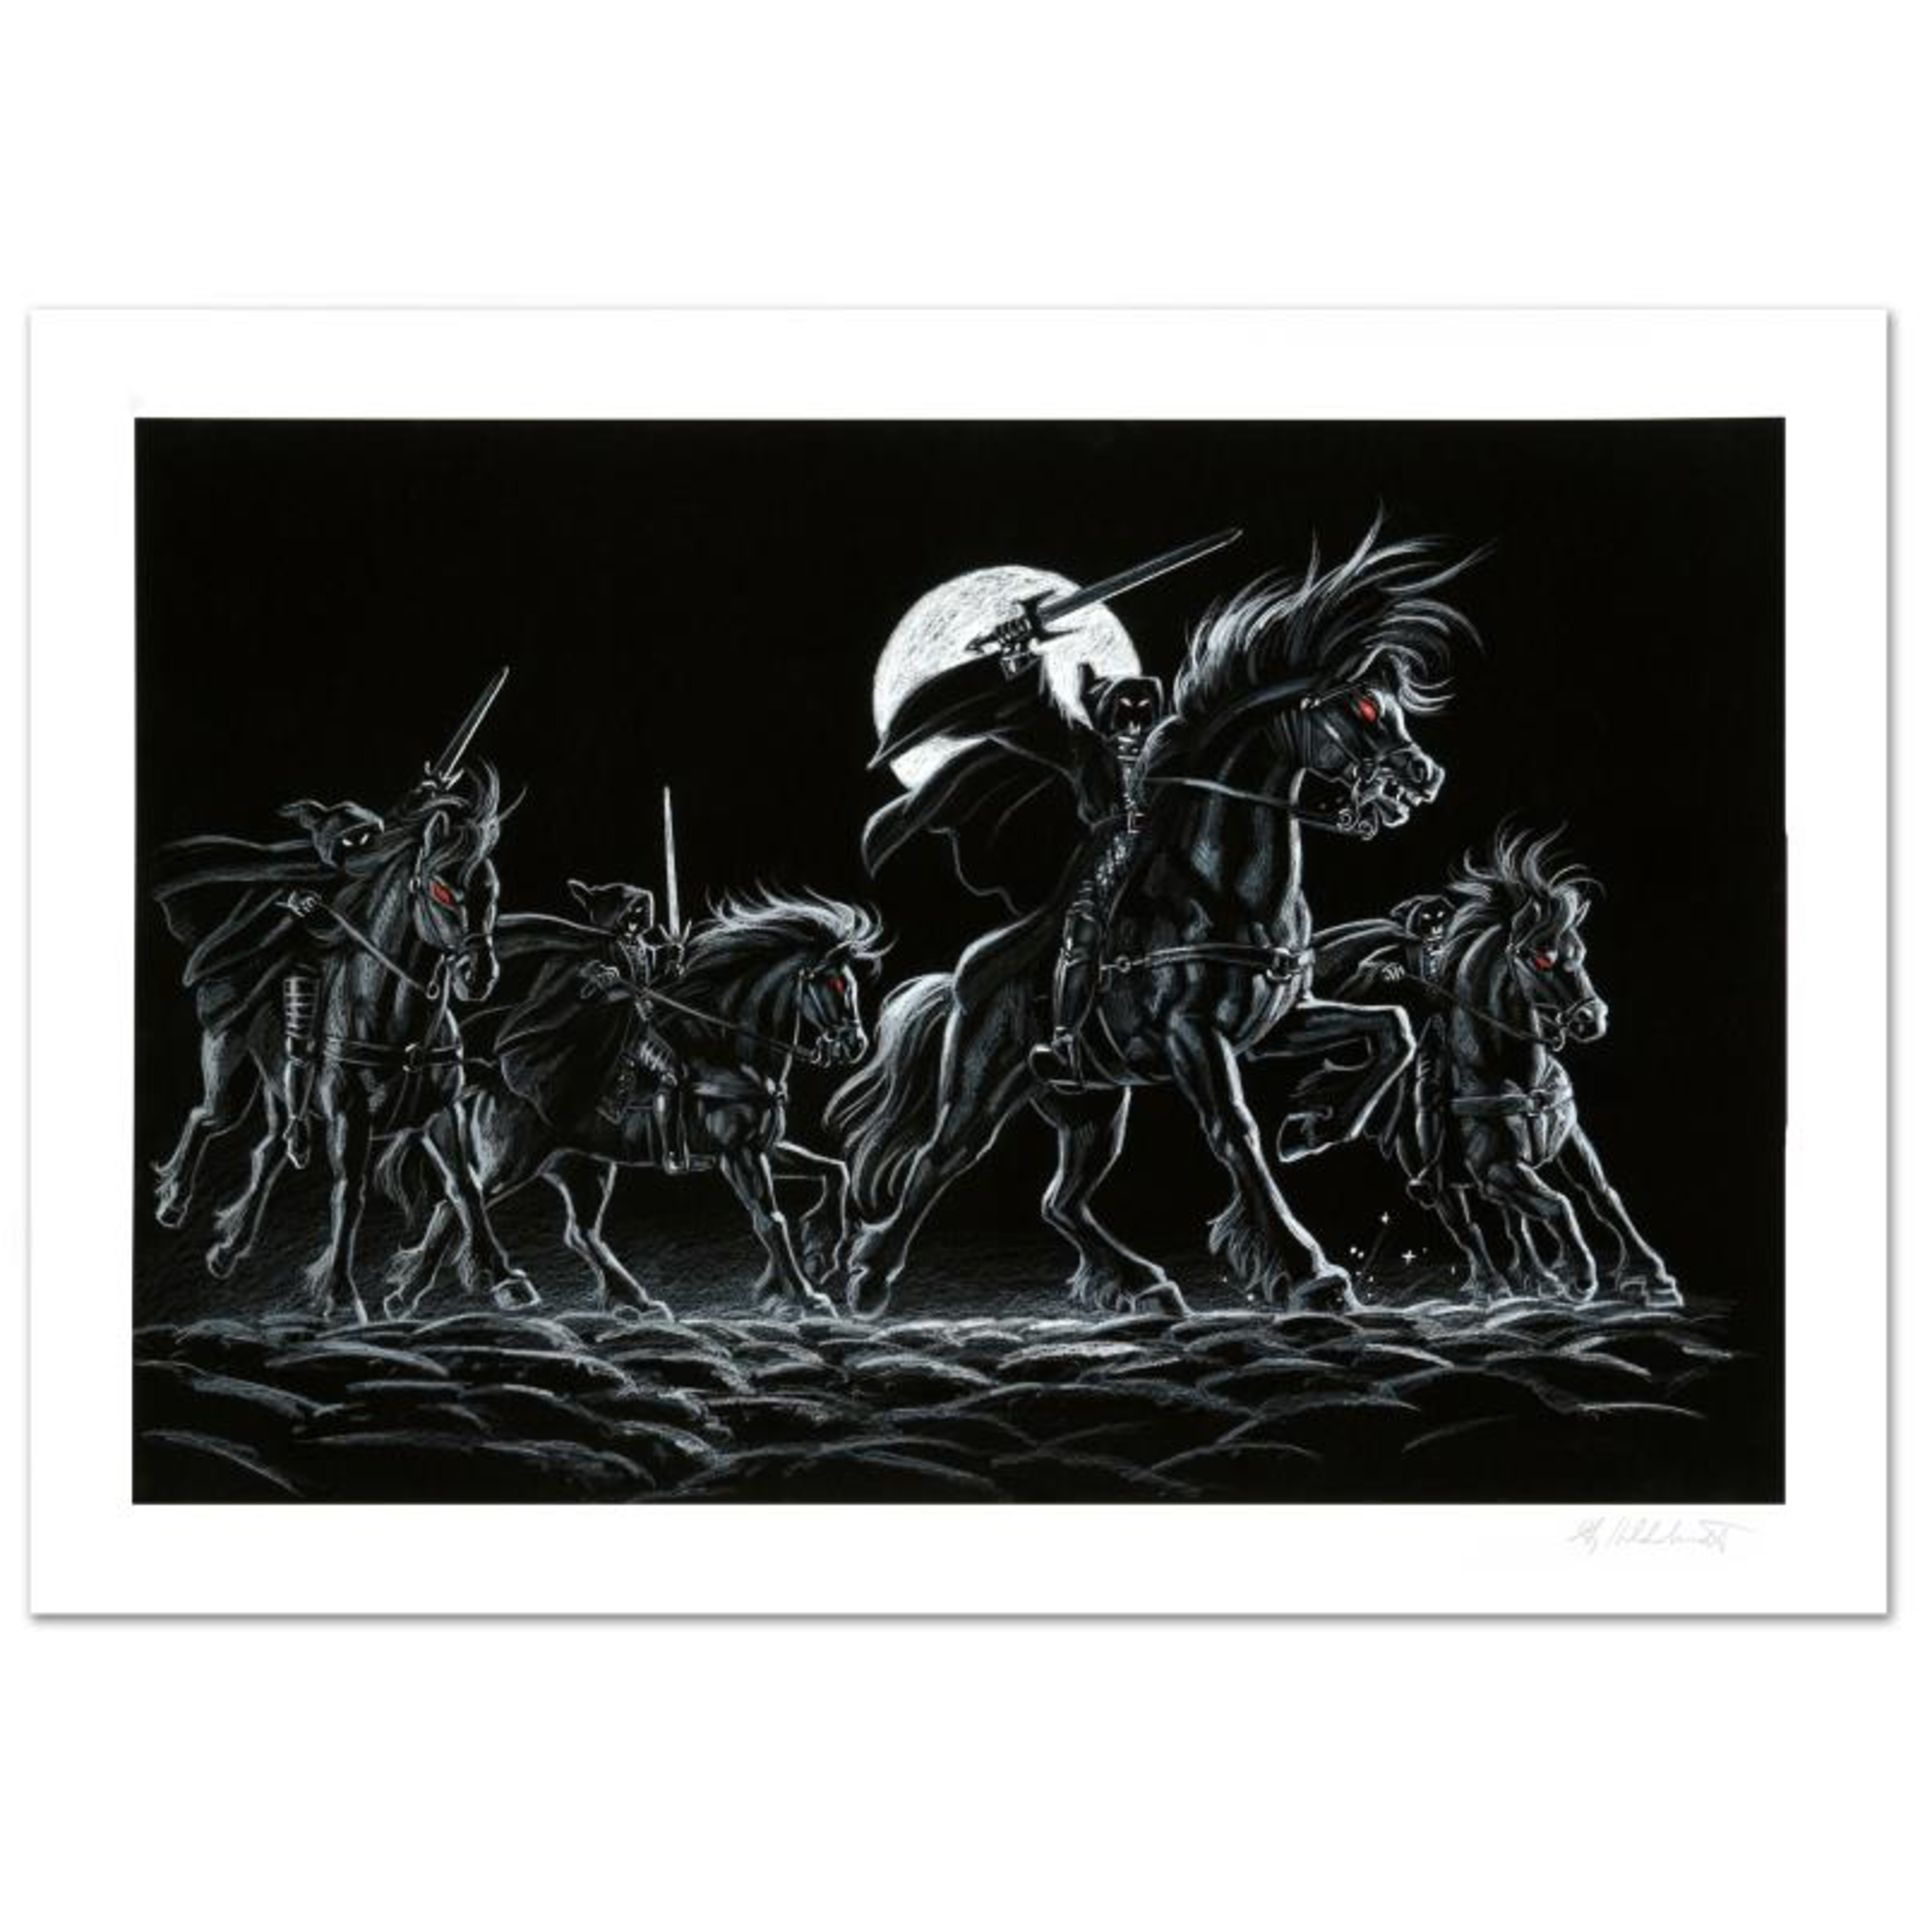 "Black Riders" Limited Edition Giclee by Greg Hildebrandt. Numbered and Hand Sig